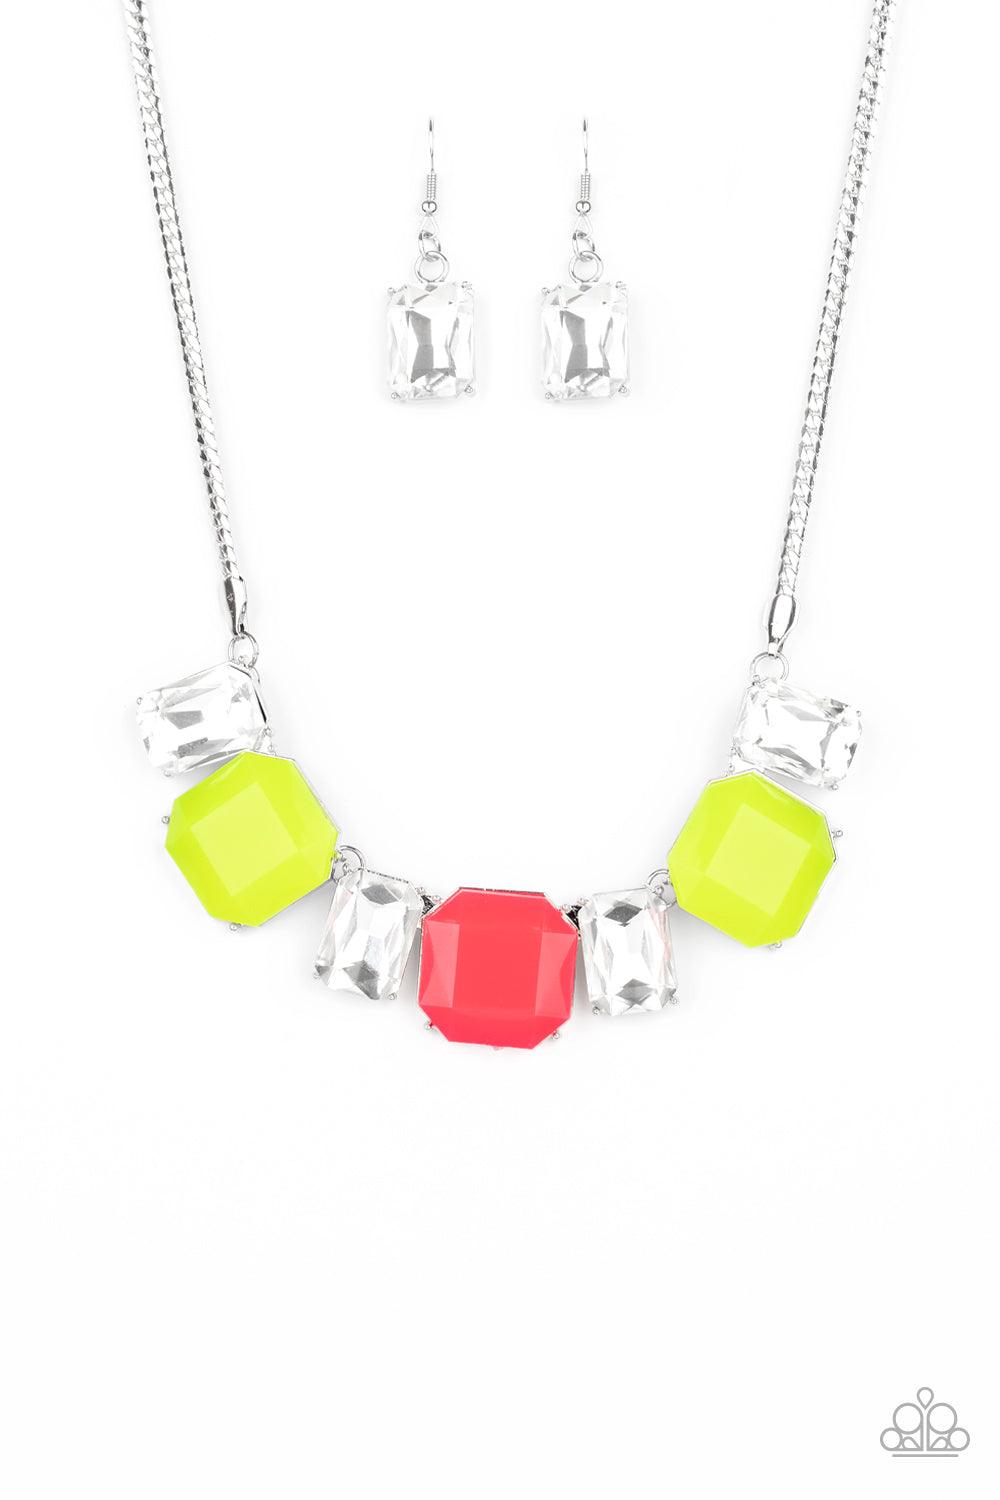 Paparazzi Accessories Royal Crest - Multi Neon yellow and pink beads connect with exaggerated emerald style white rhinestones, creating vivacious sparkle below the collar. Features an adjustable clasp closure. Sold as one individual necklace. Includes one